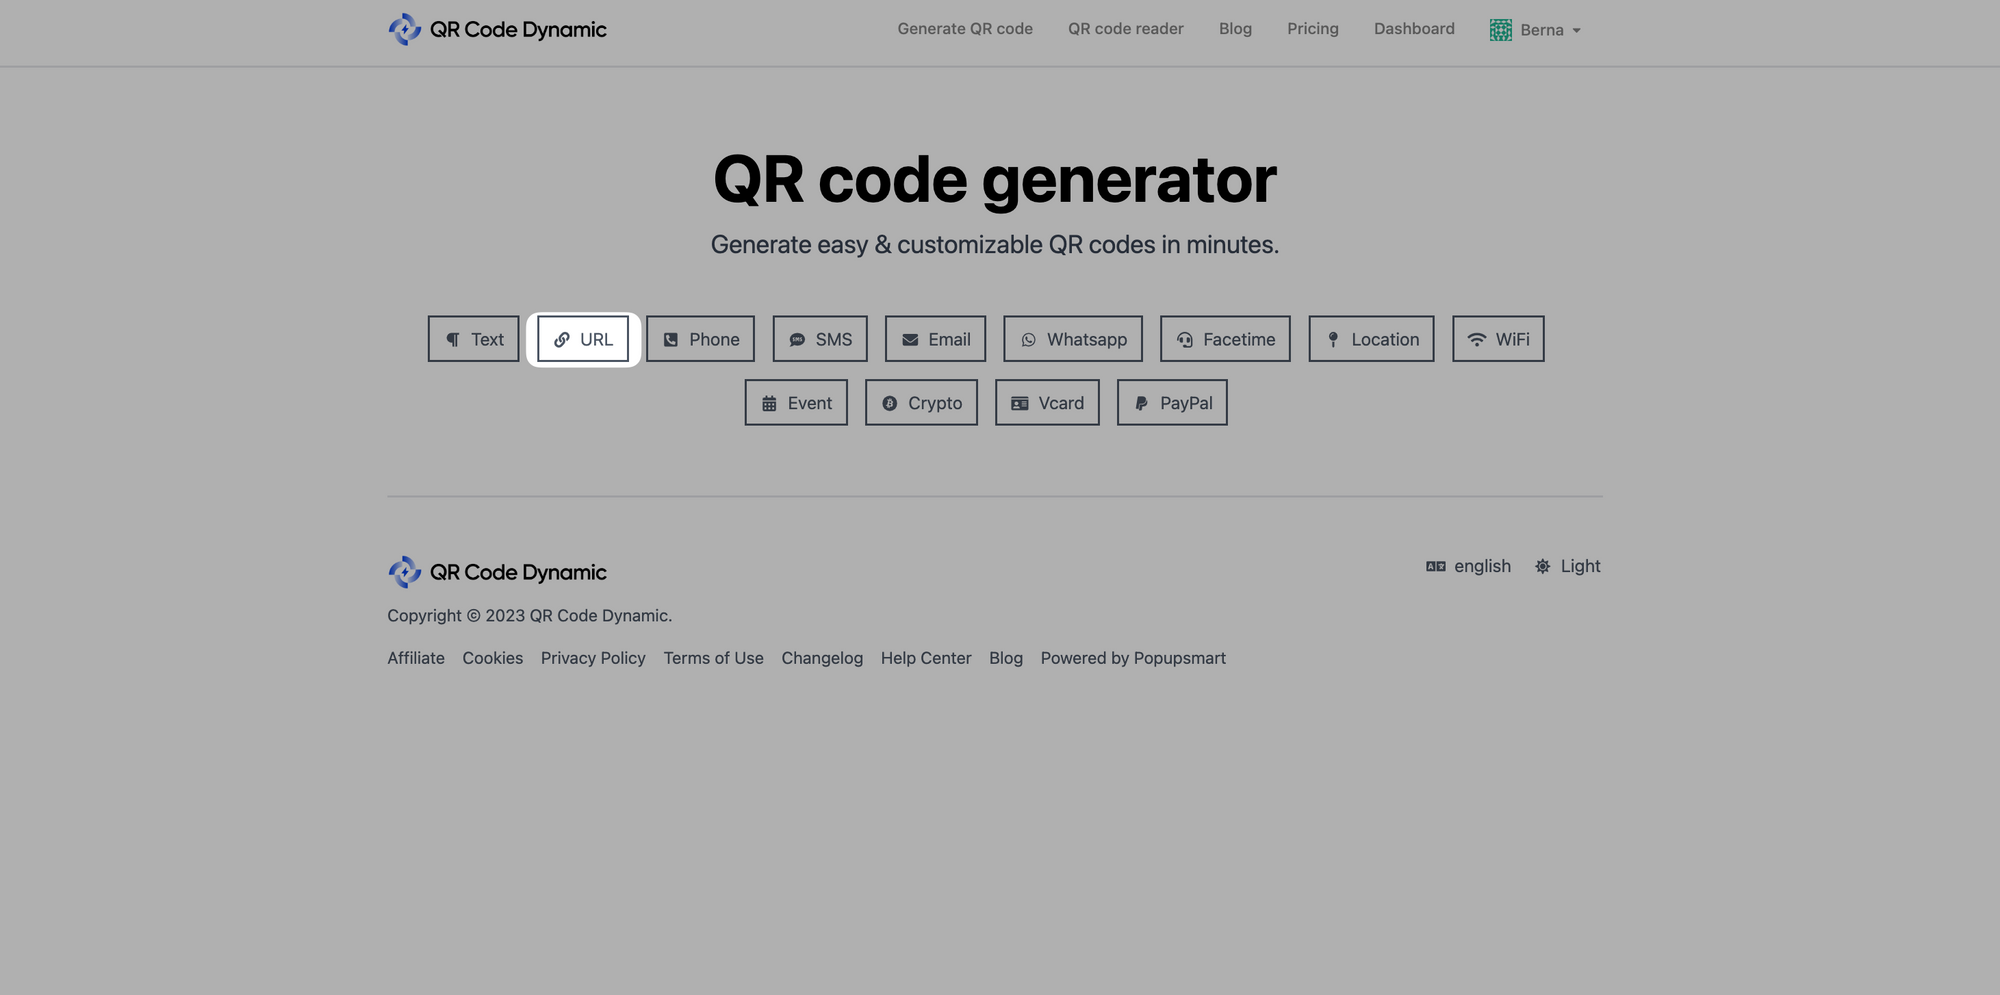 a screenshot of selecting URL from the QR code types list of QRCodeDynamic